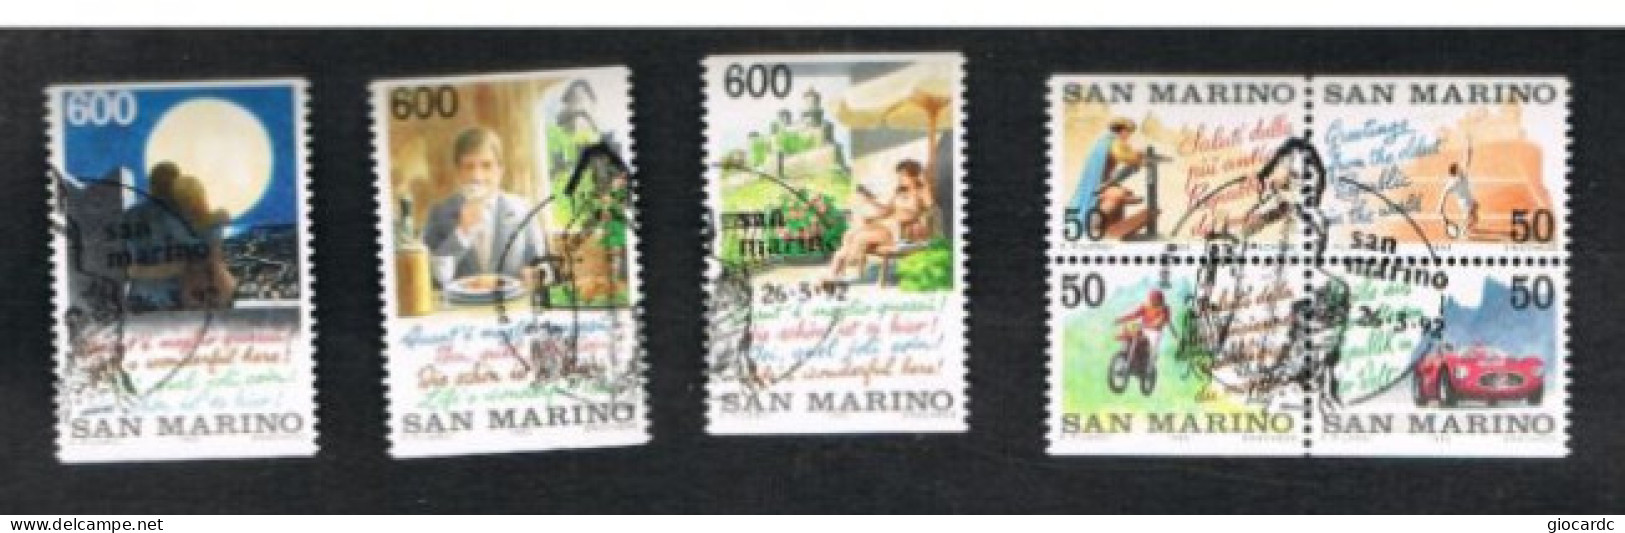 SAN MARINO - UN 1344.1350 - 1992 SITI TURISTICI DI SAN MARINO (COMPLET SET OF 7 STAMPS,4 SE-TENANT - BY BOOKLET)  - USED - Gebruikt